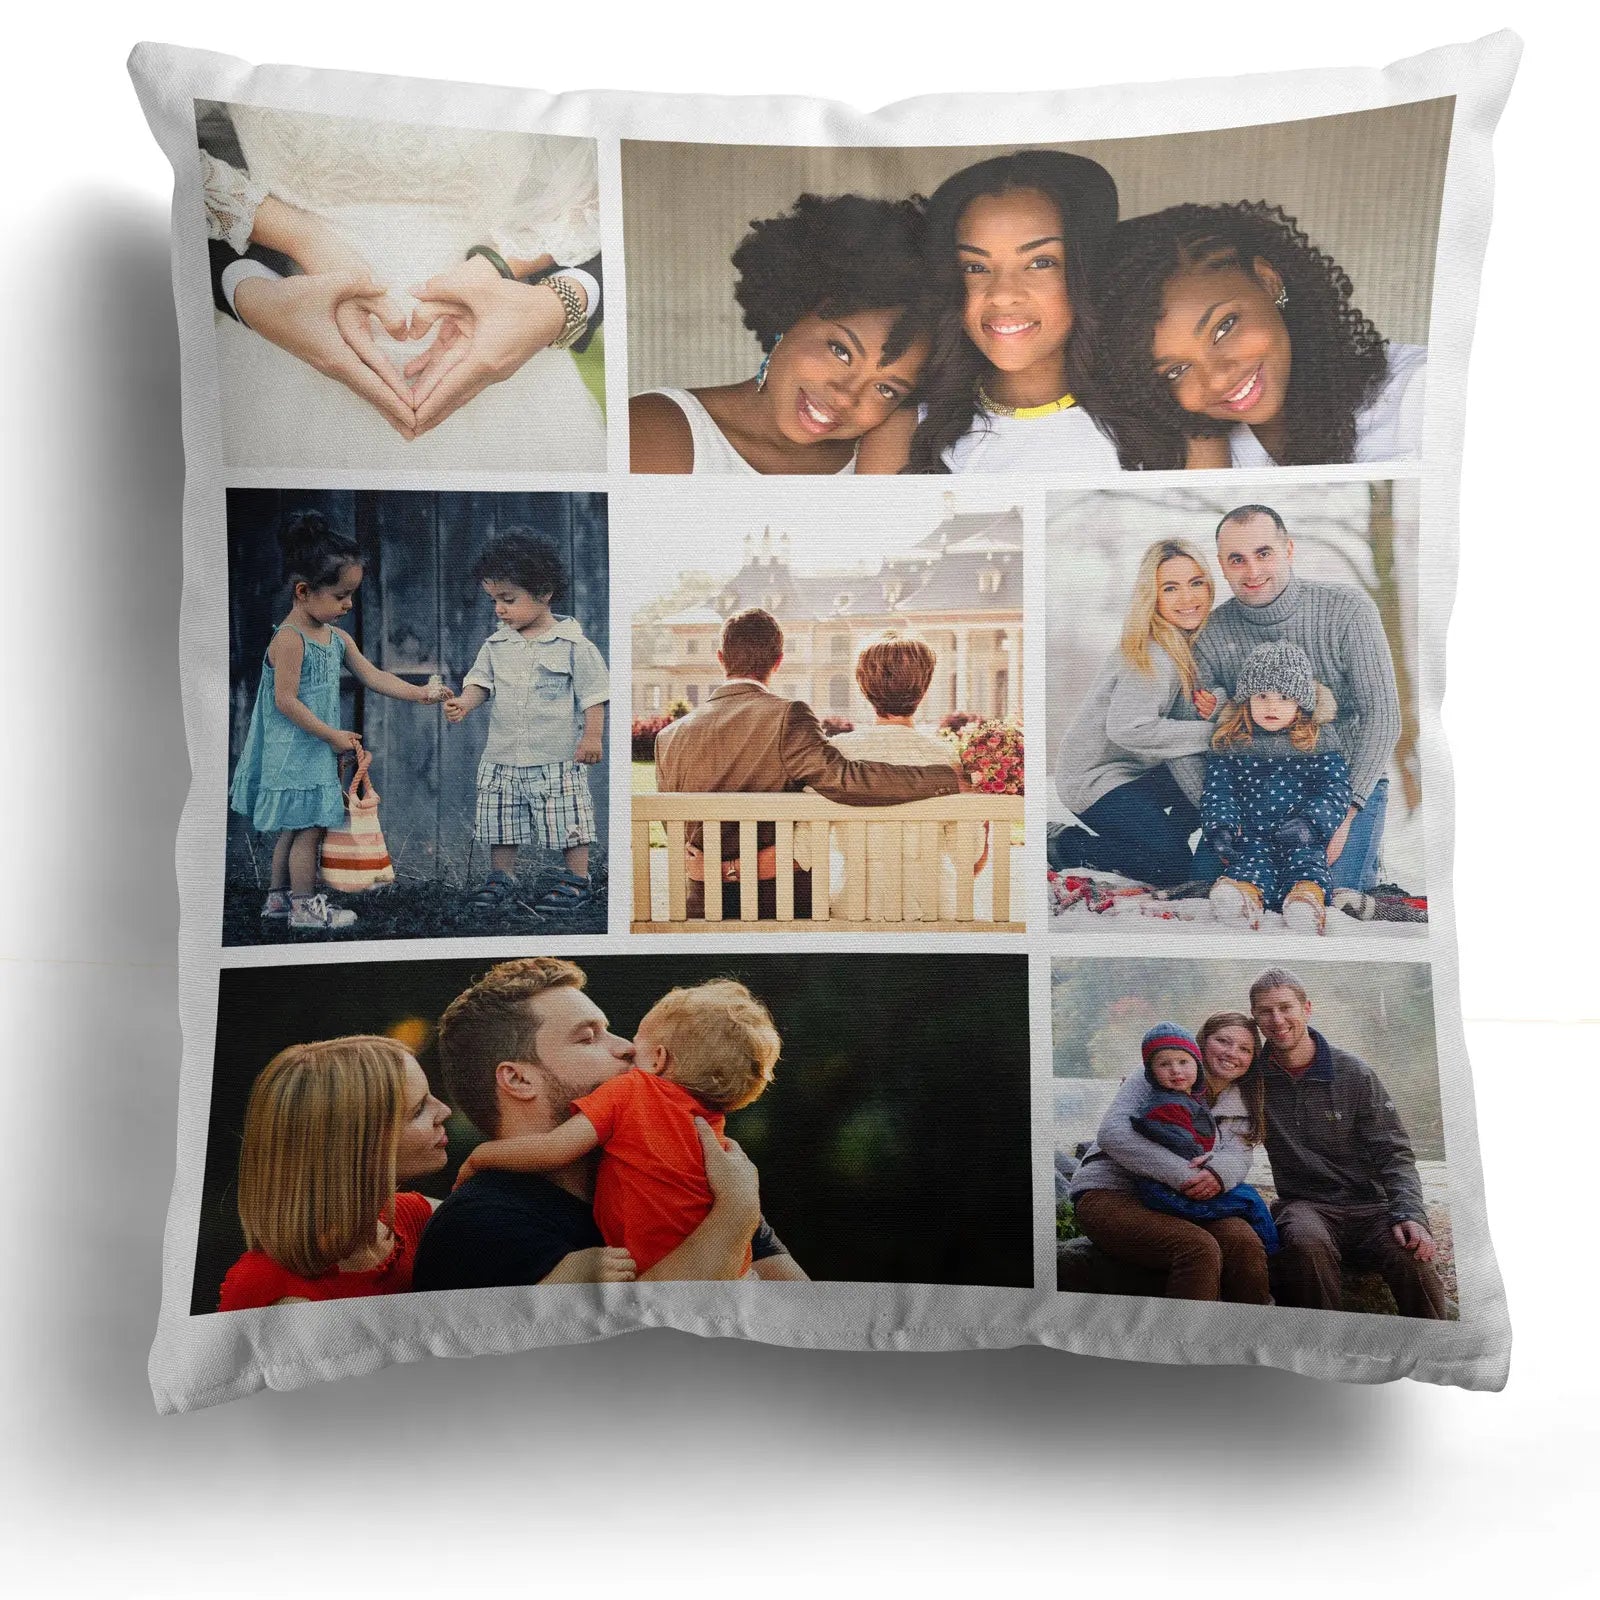 Personalised Collage Style Cushion Cover  40x40cm Photo Cushion - 7 Images - CushionPop